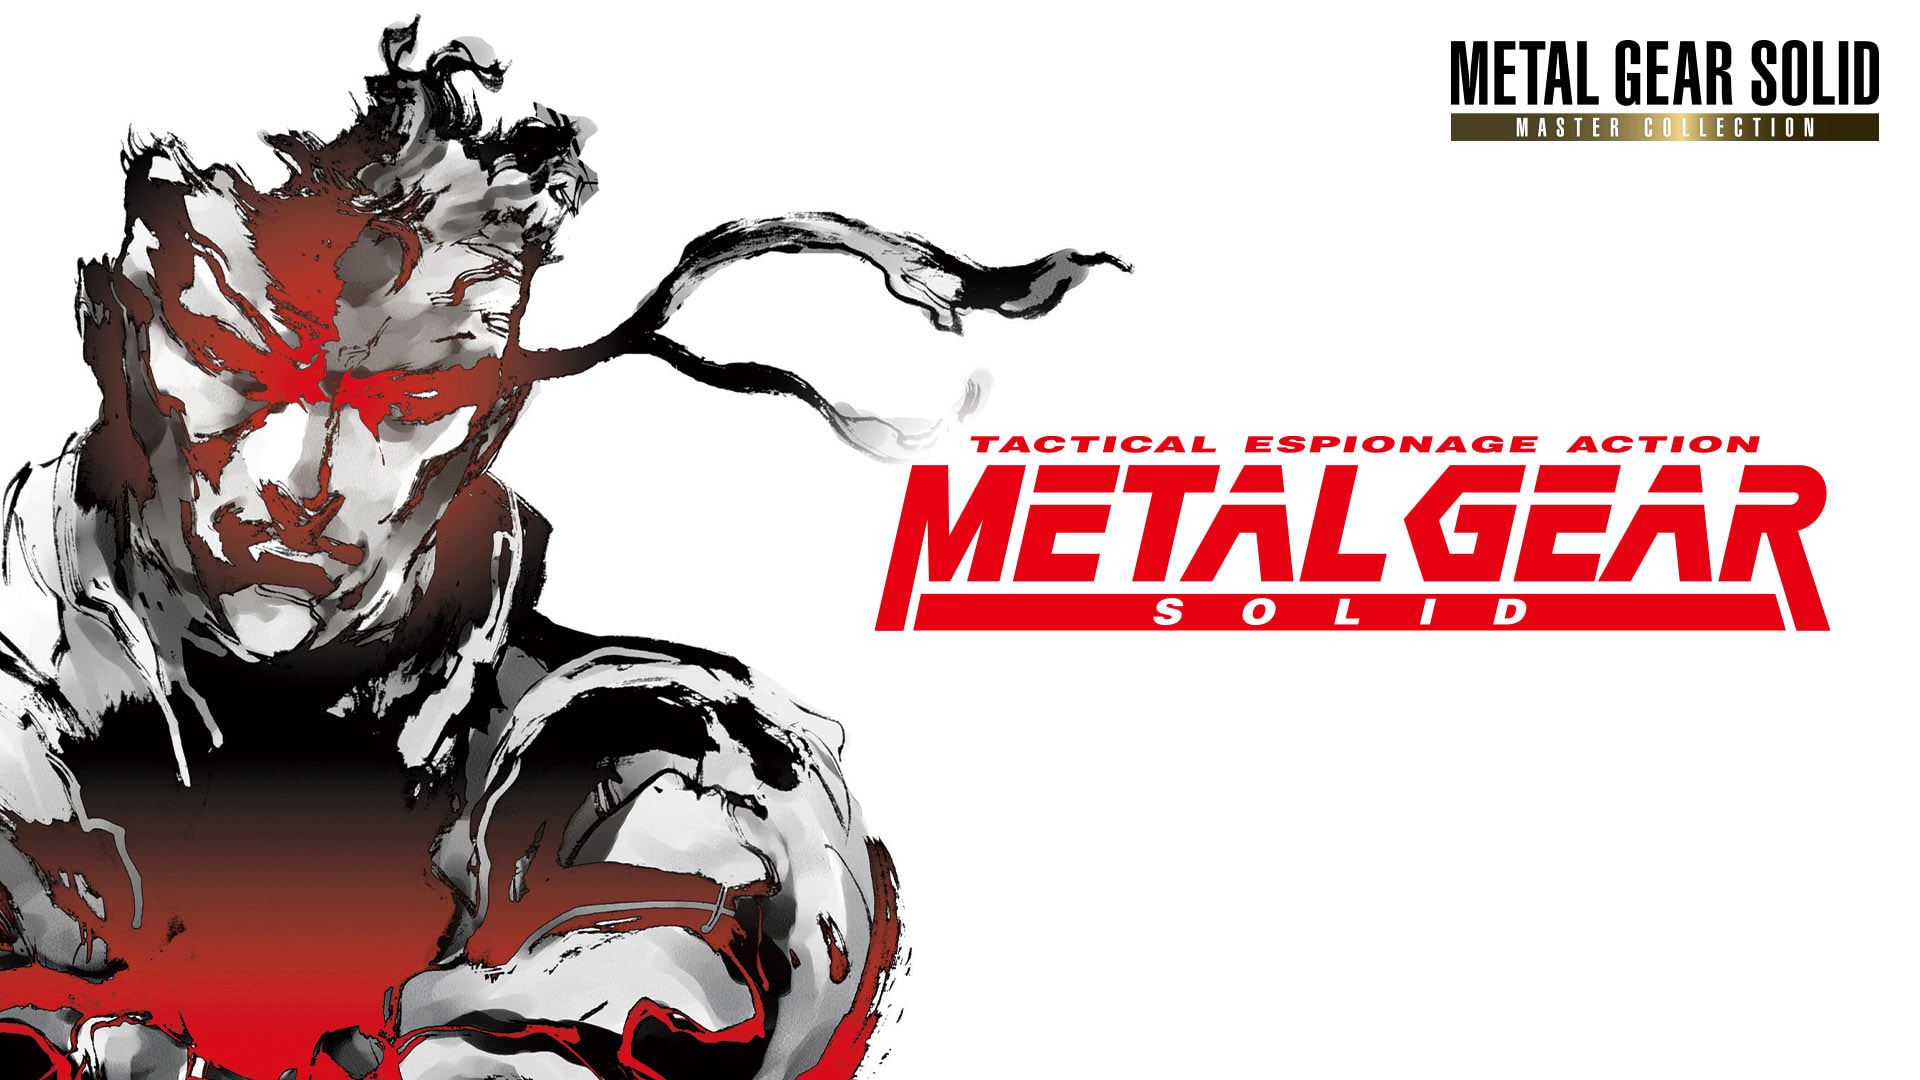 METAL GEAR SOLID - Master Collection Version 1